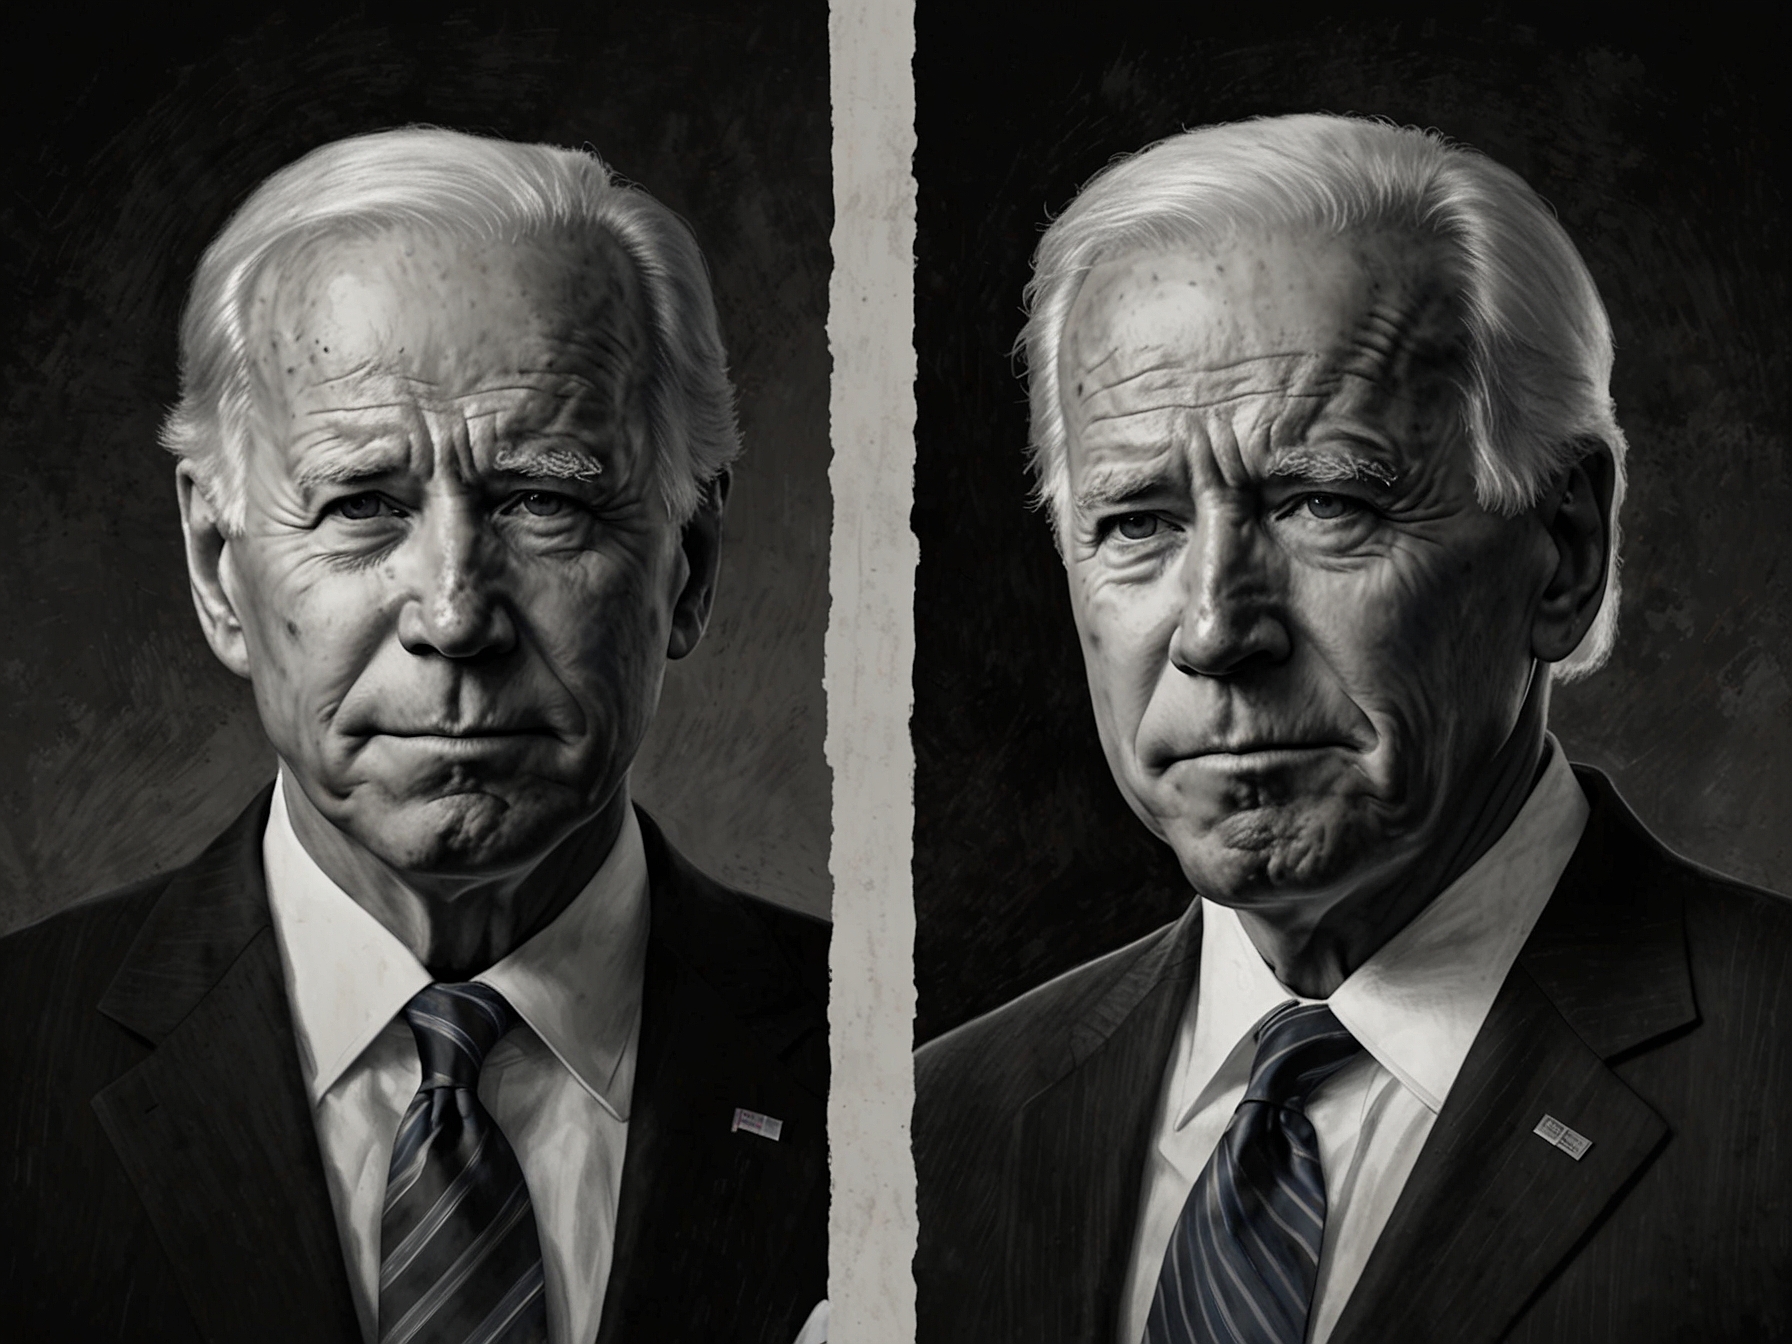 An illustration showing President Joe Biden and former President Donald Trump, highlighting their age and the challenges it poses for their leadership in the modern political landscape.